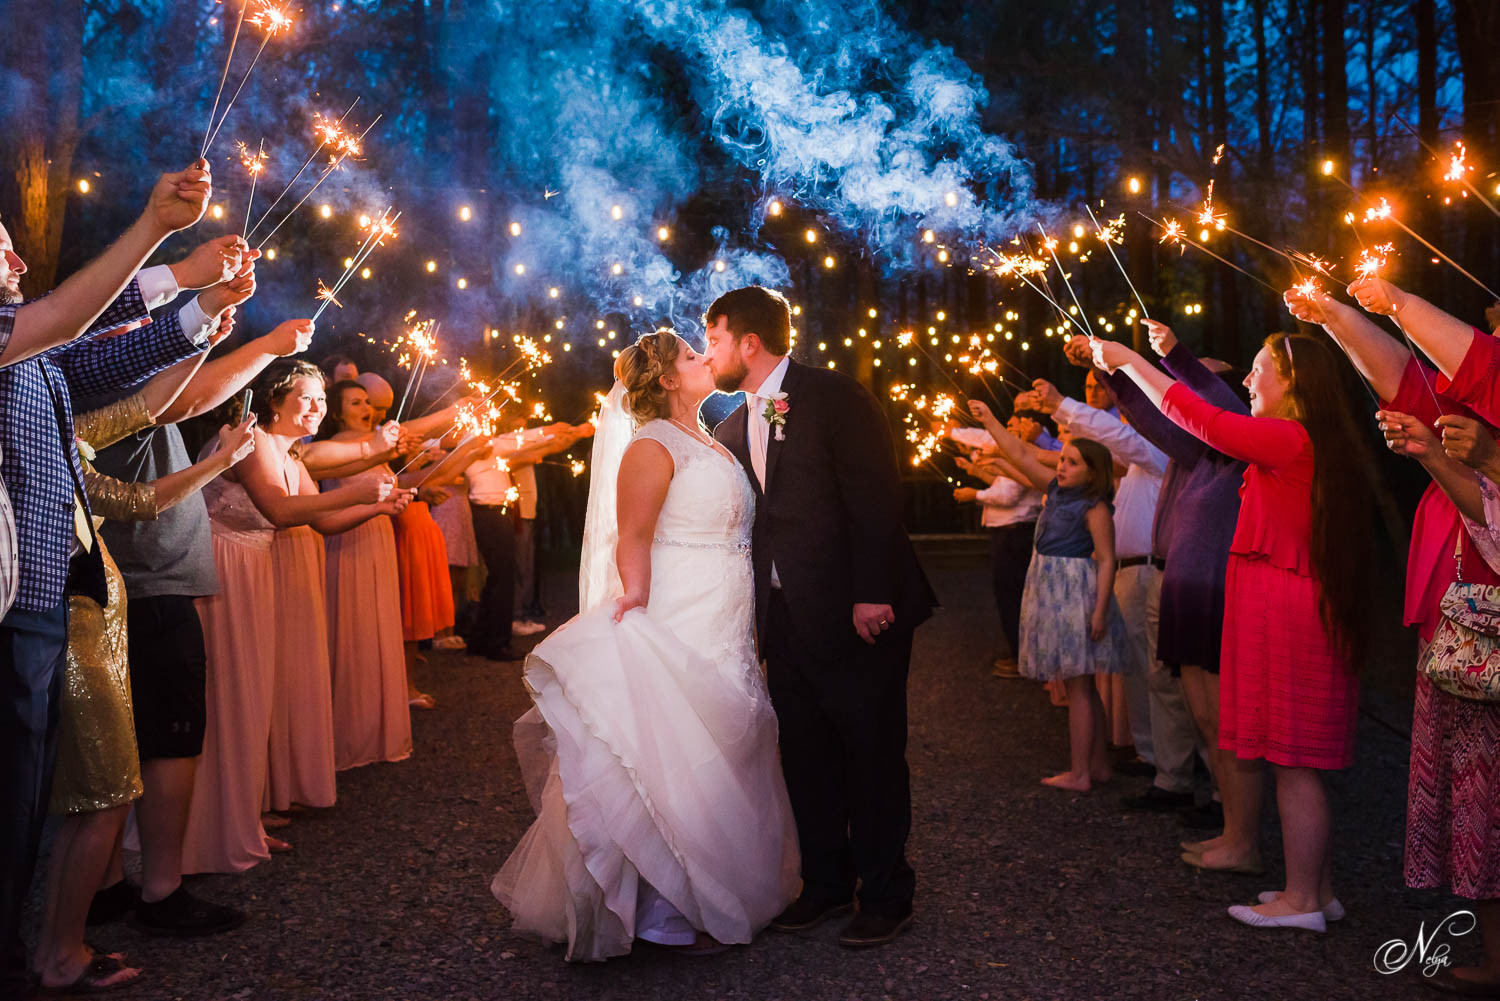 Wedding Pictures With Sparklers
 Wedding Sparklers What kind should I Tips for better